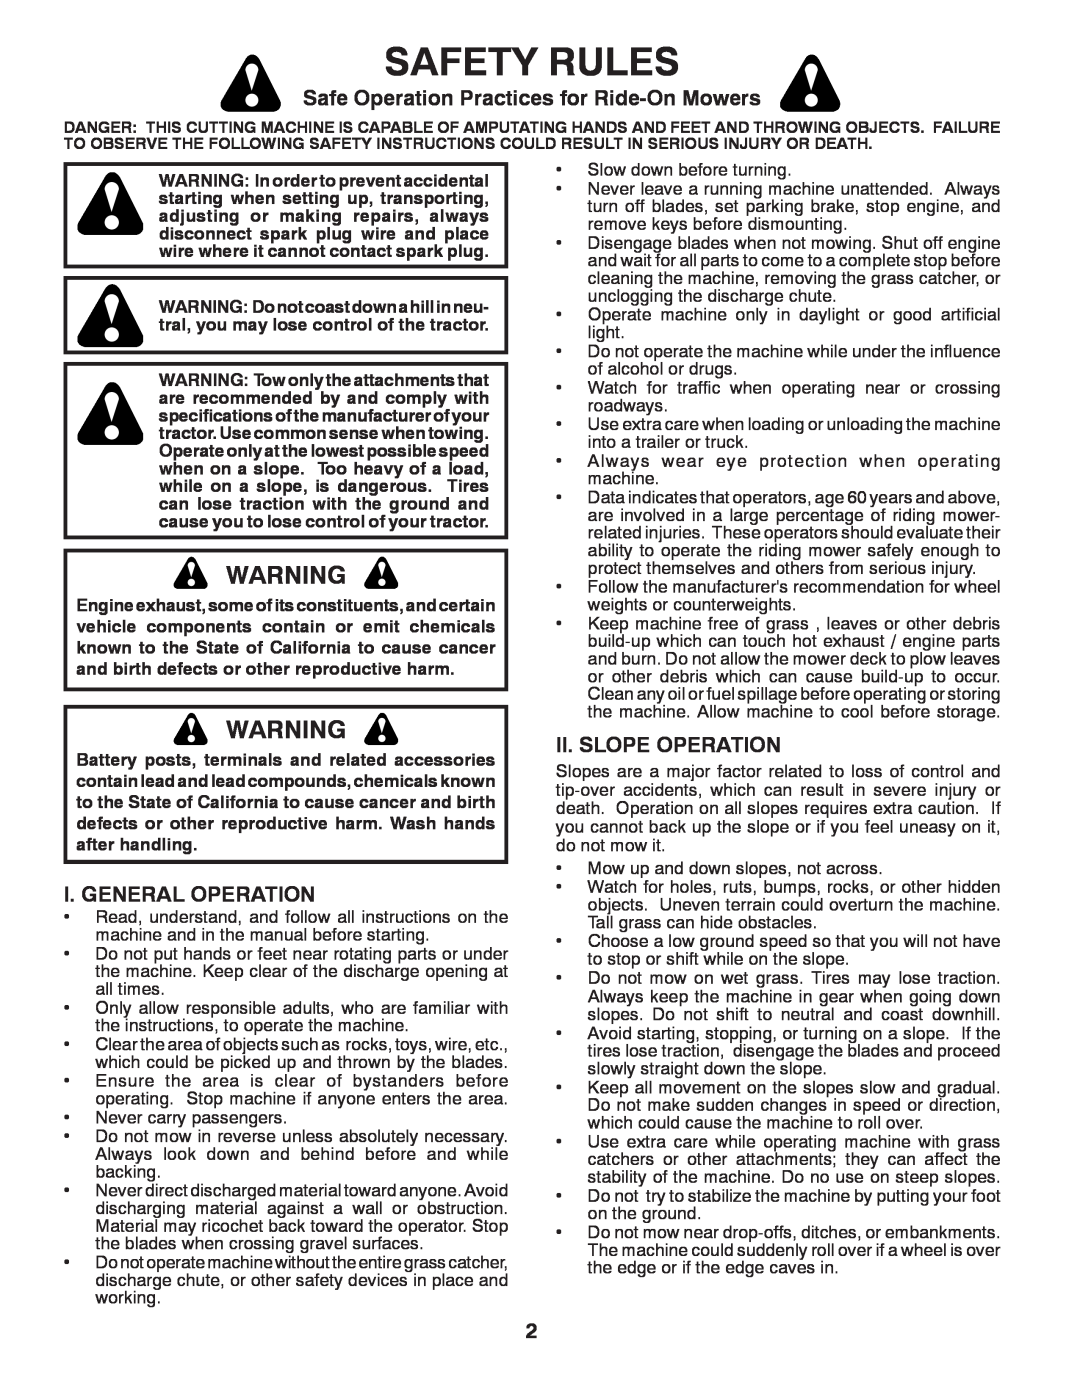 Poulan PXT175G42 manual Safety Rules, Safe Operation Practices for Ride-OnMowers, I. General Operation, Ii. Slope Operation 